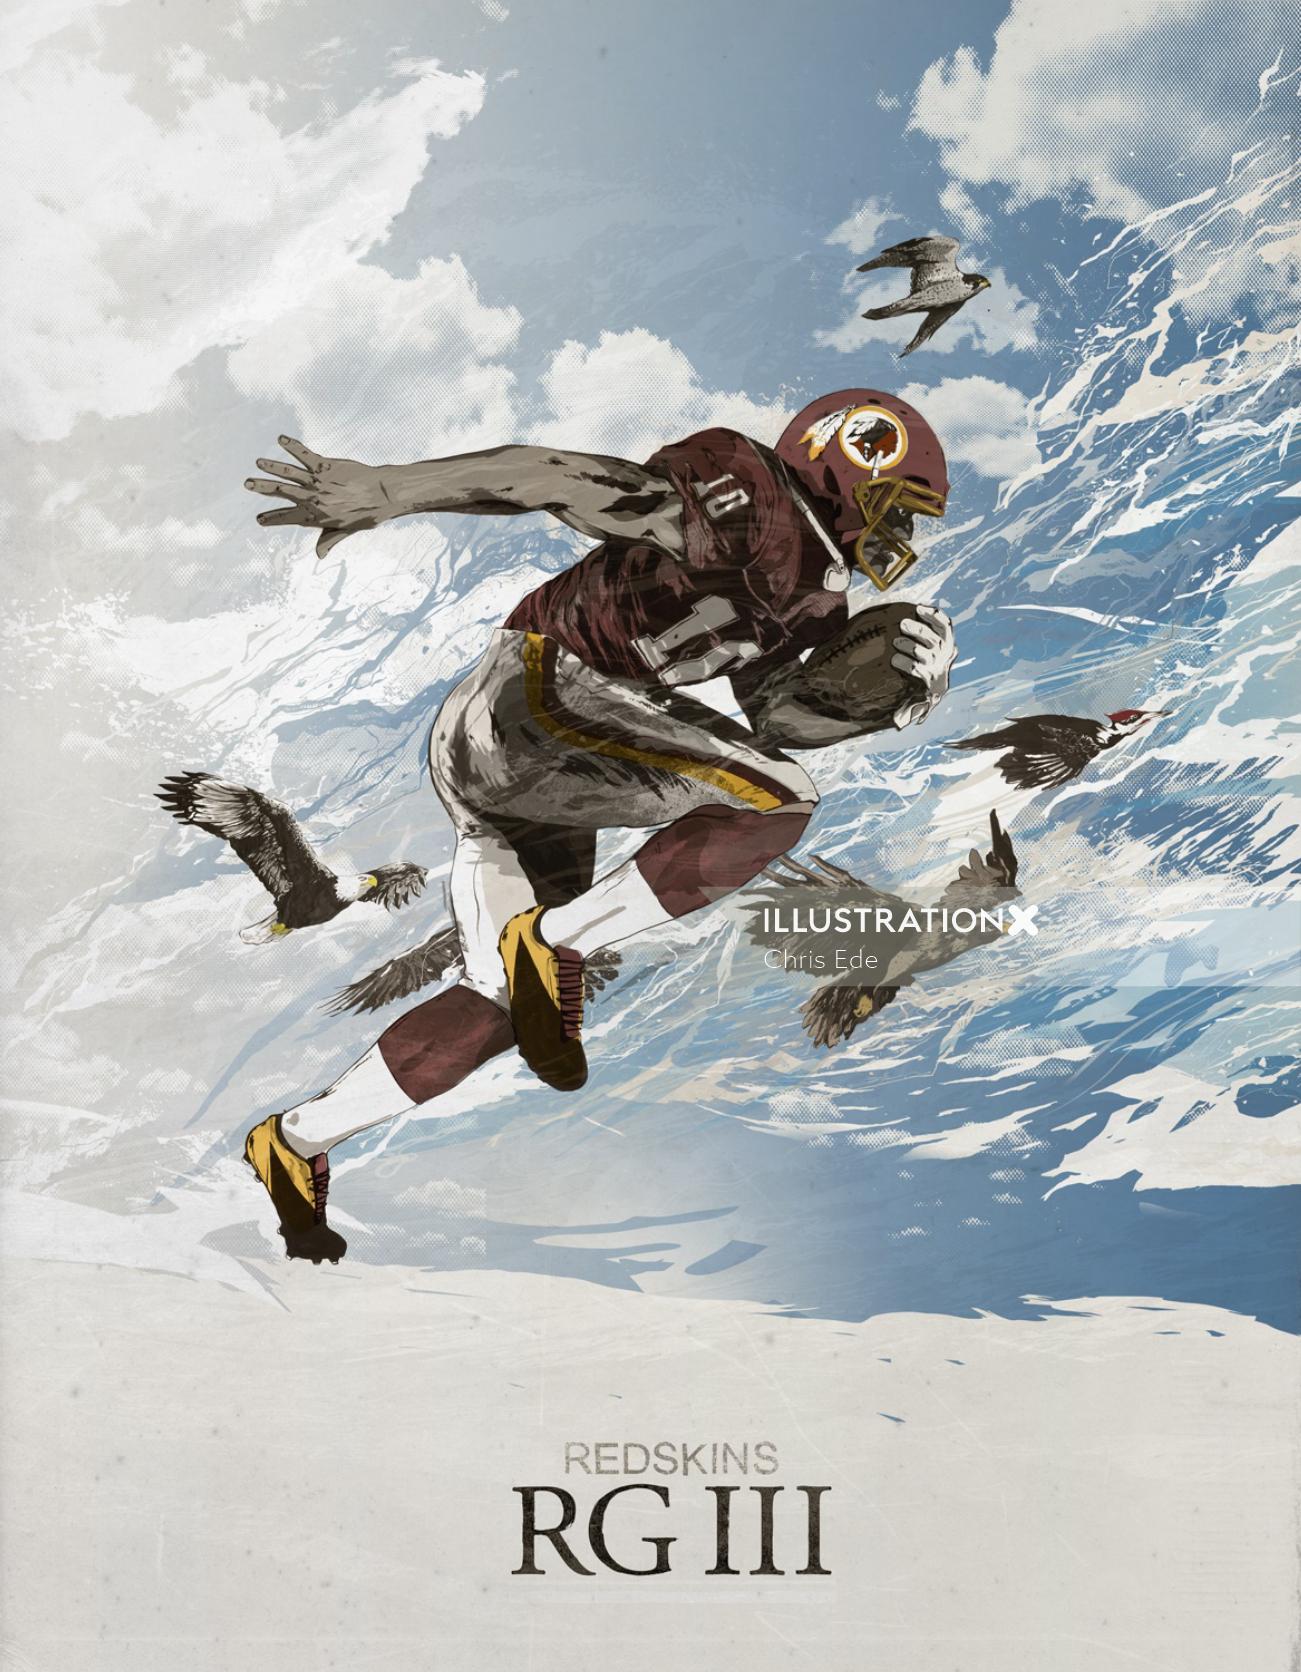 American football - An illustration by Chris Ede